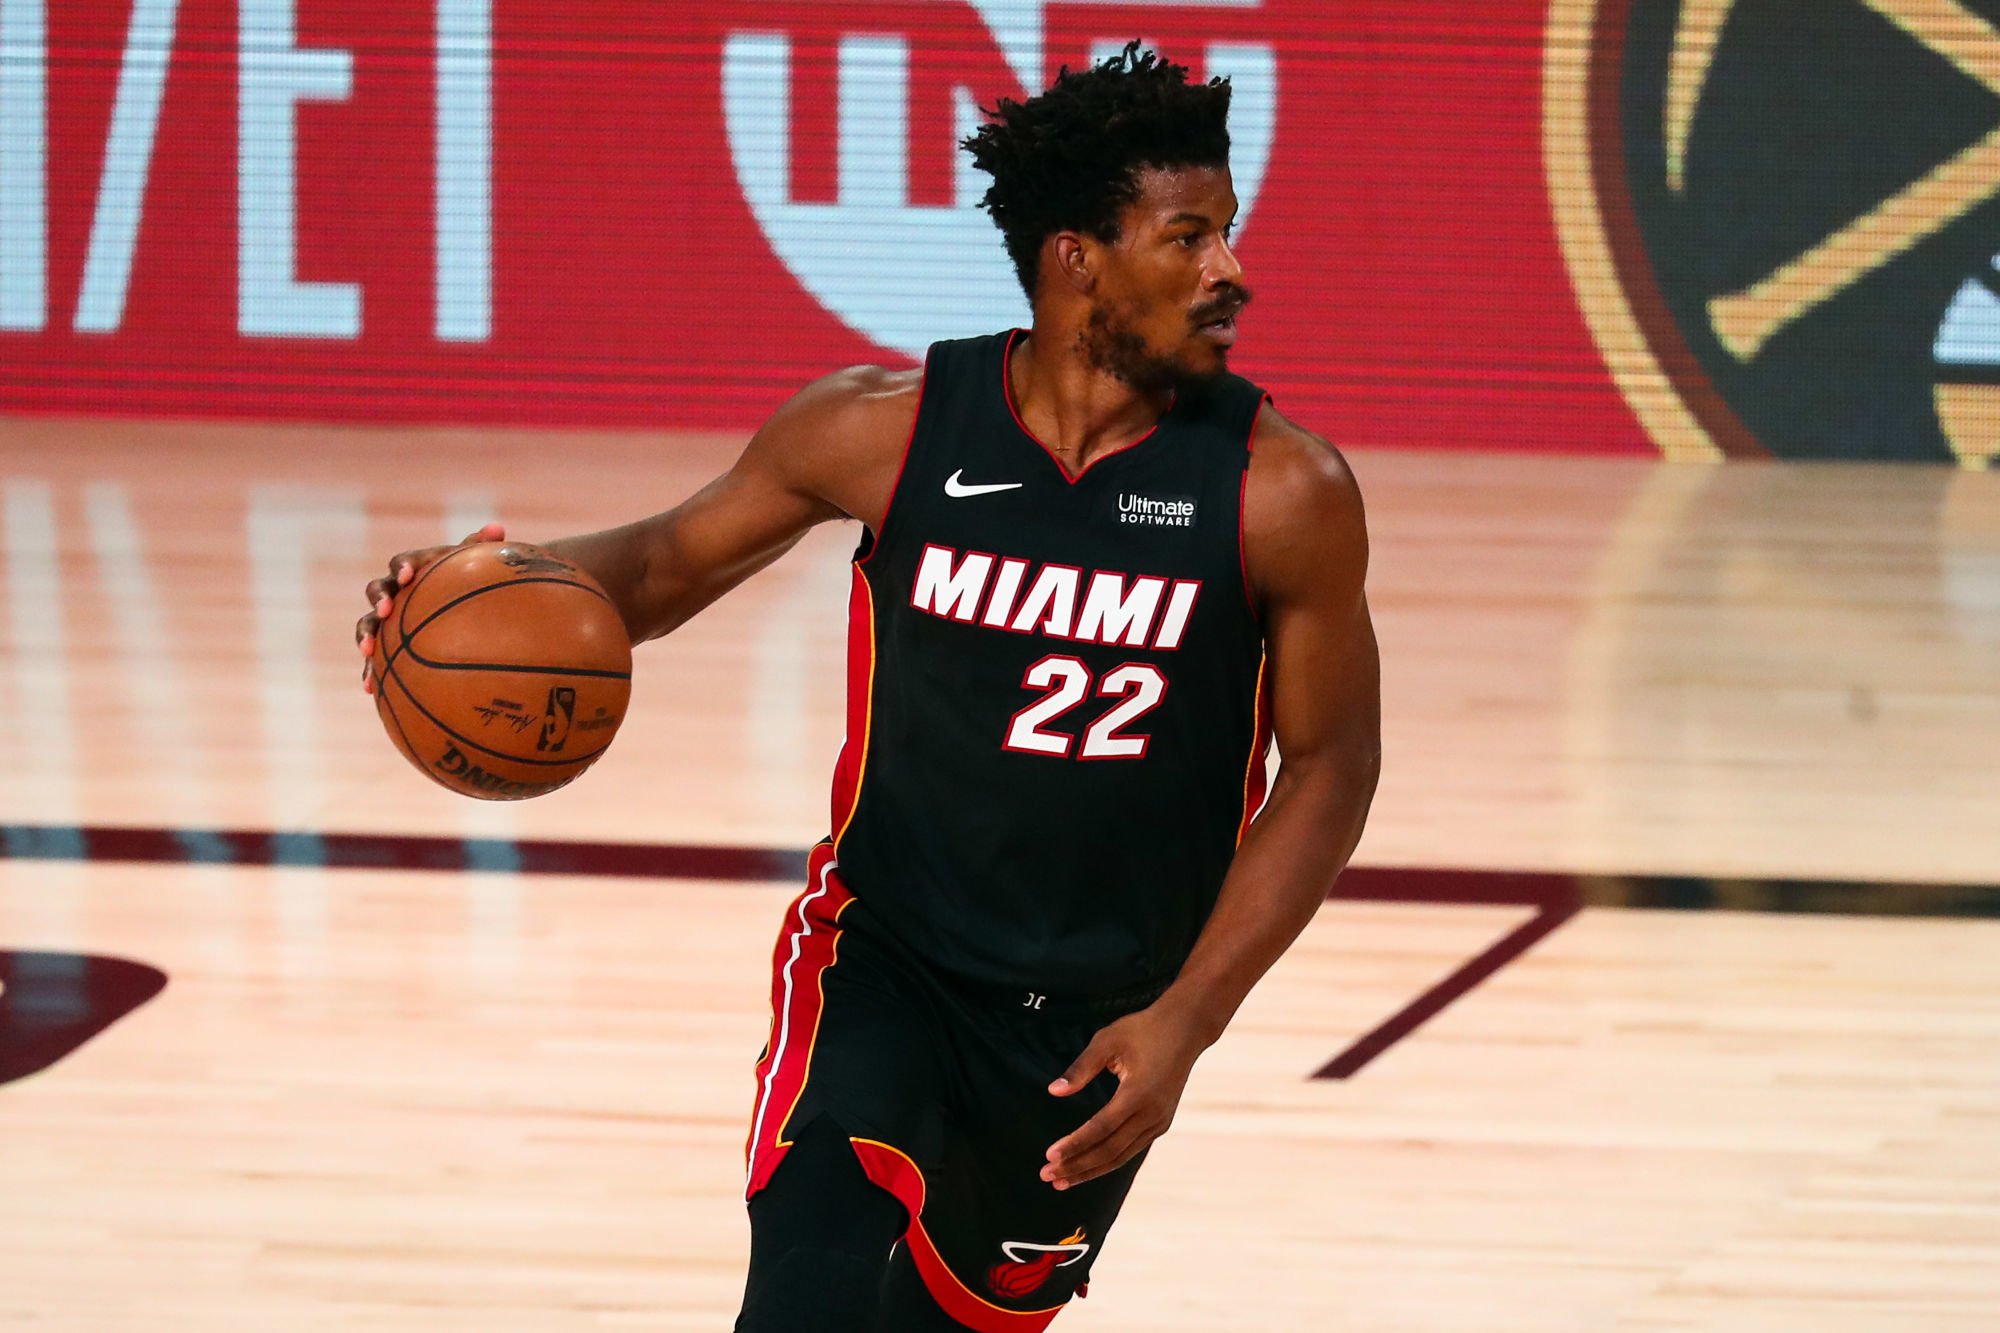 Miami Heat - Jimmy Butler (22)
Photo by Icon Sport